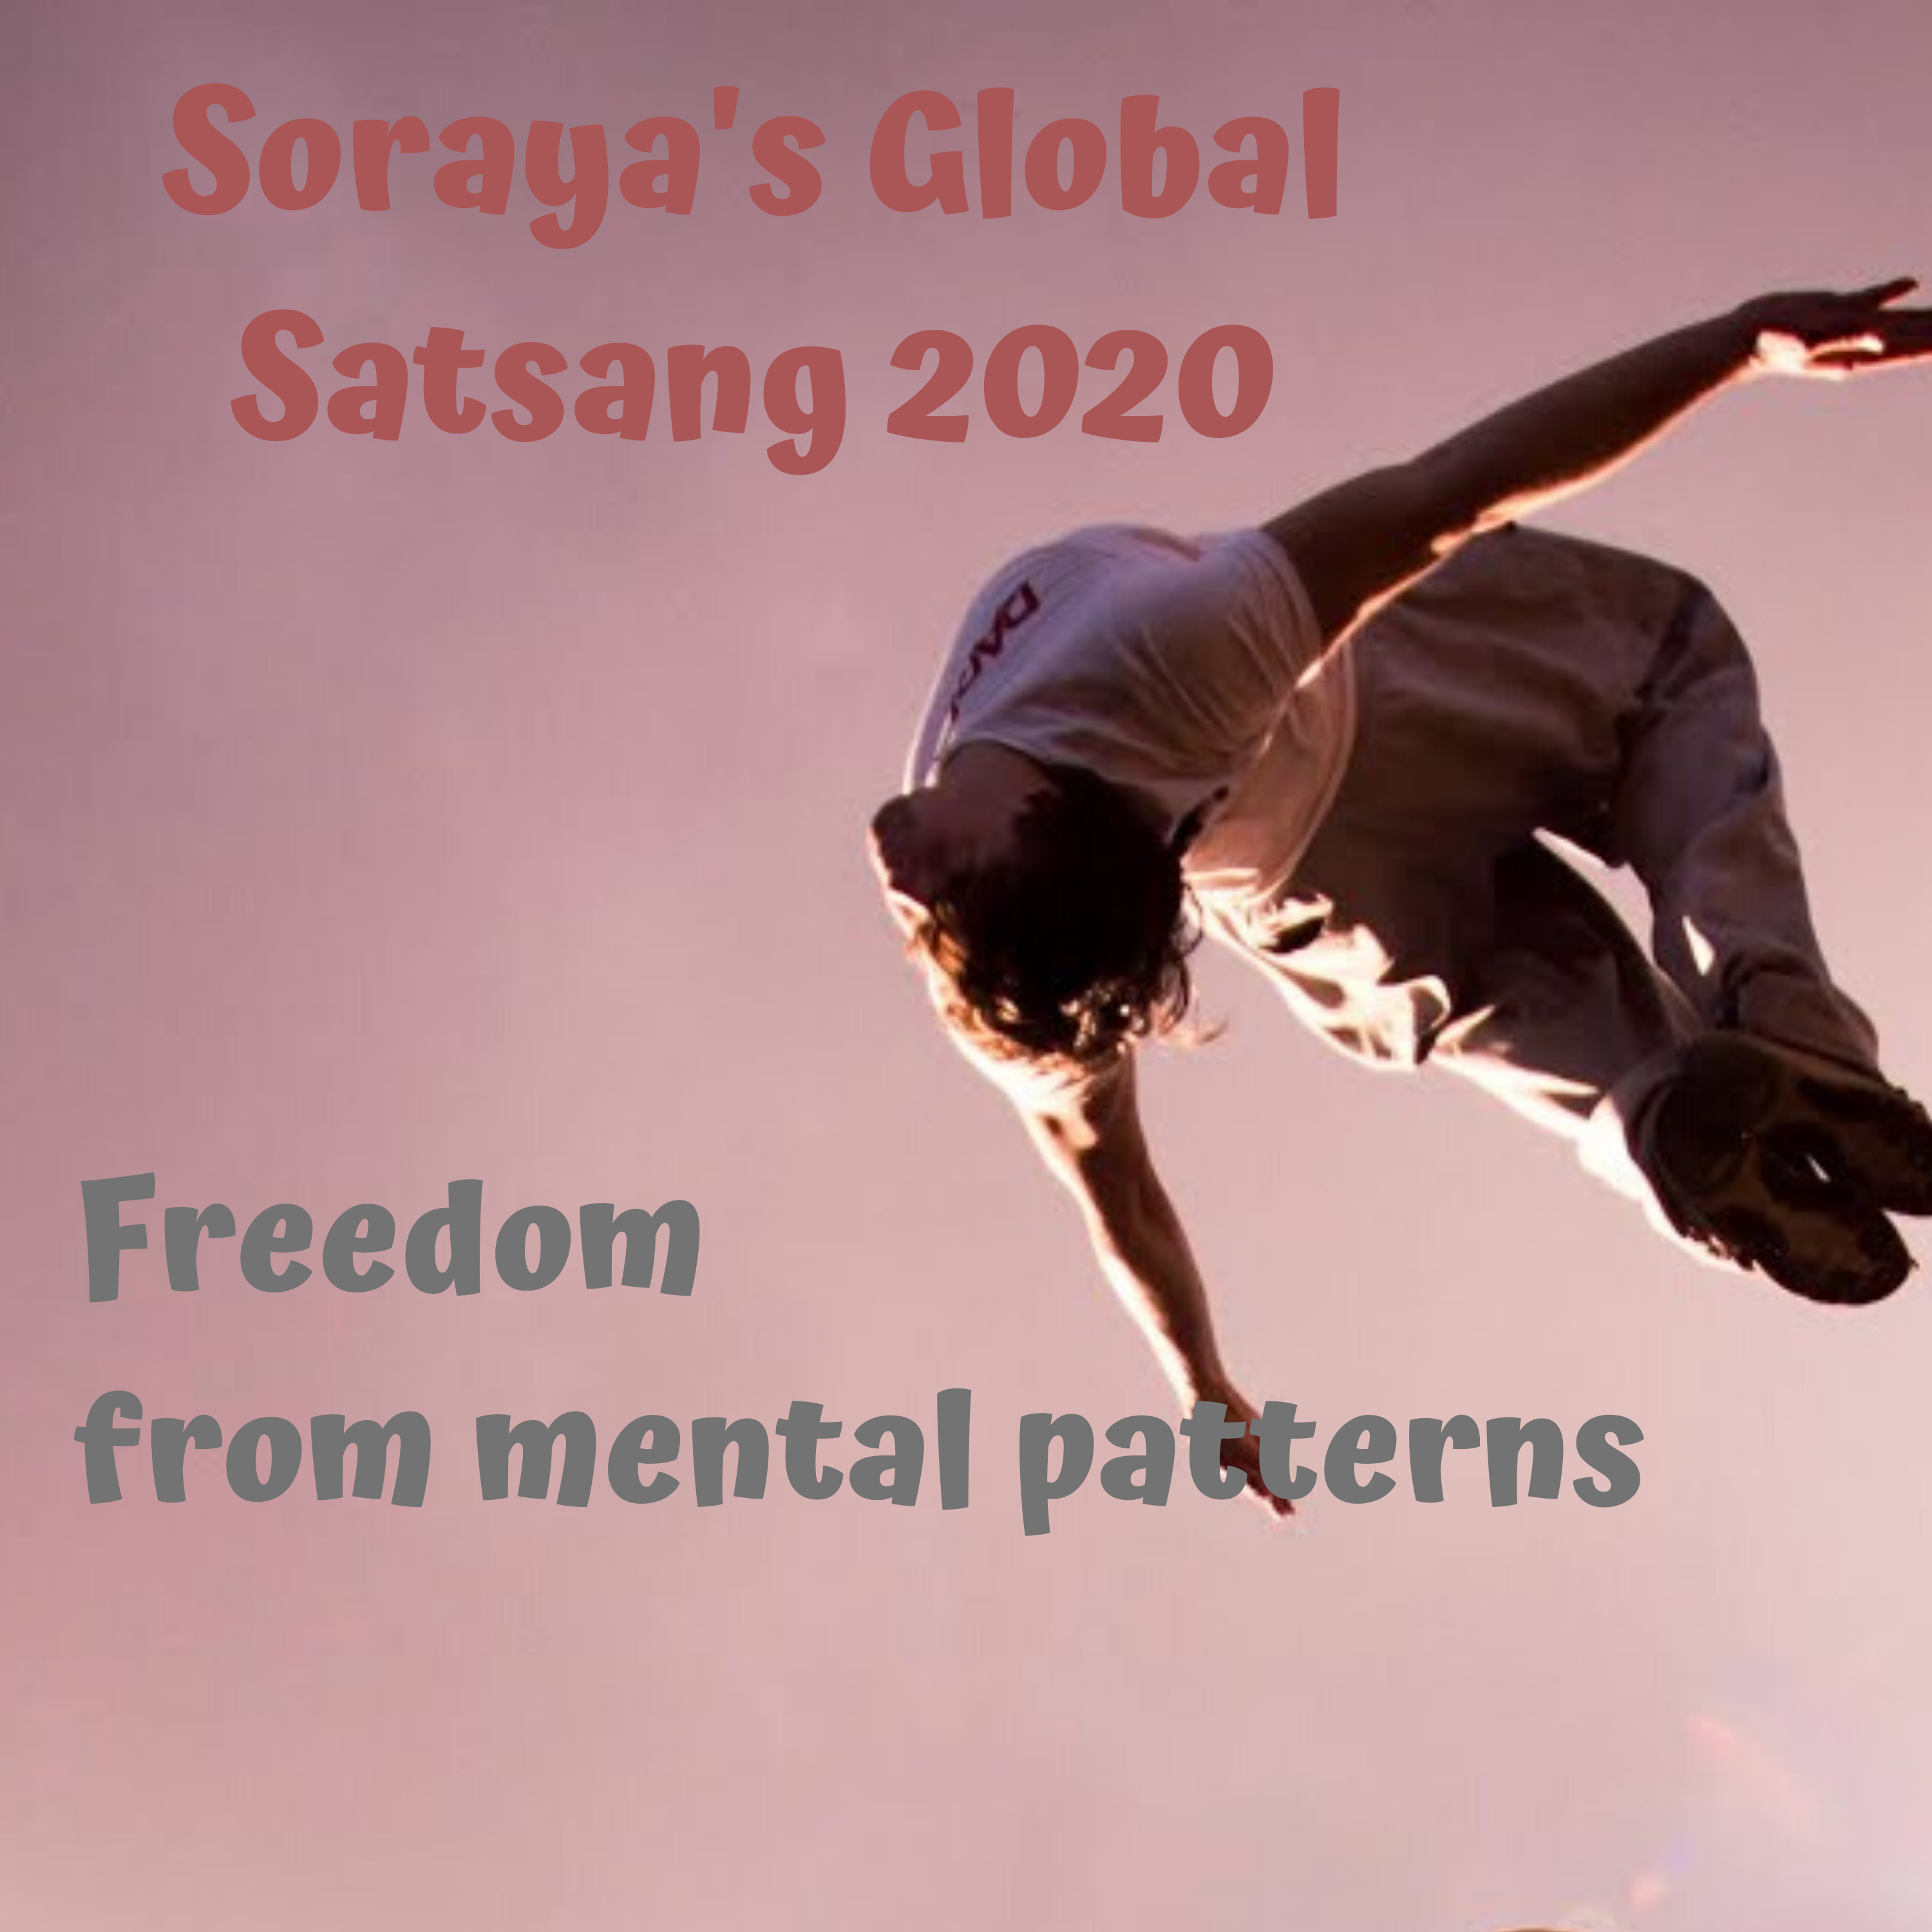 Global Satsang: Freedom from Mental Patterns